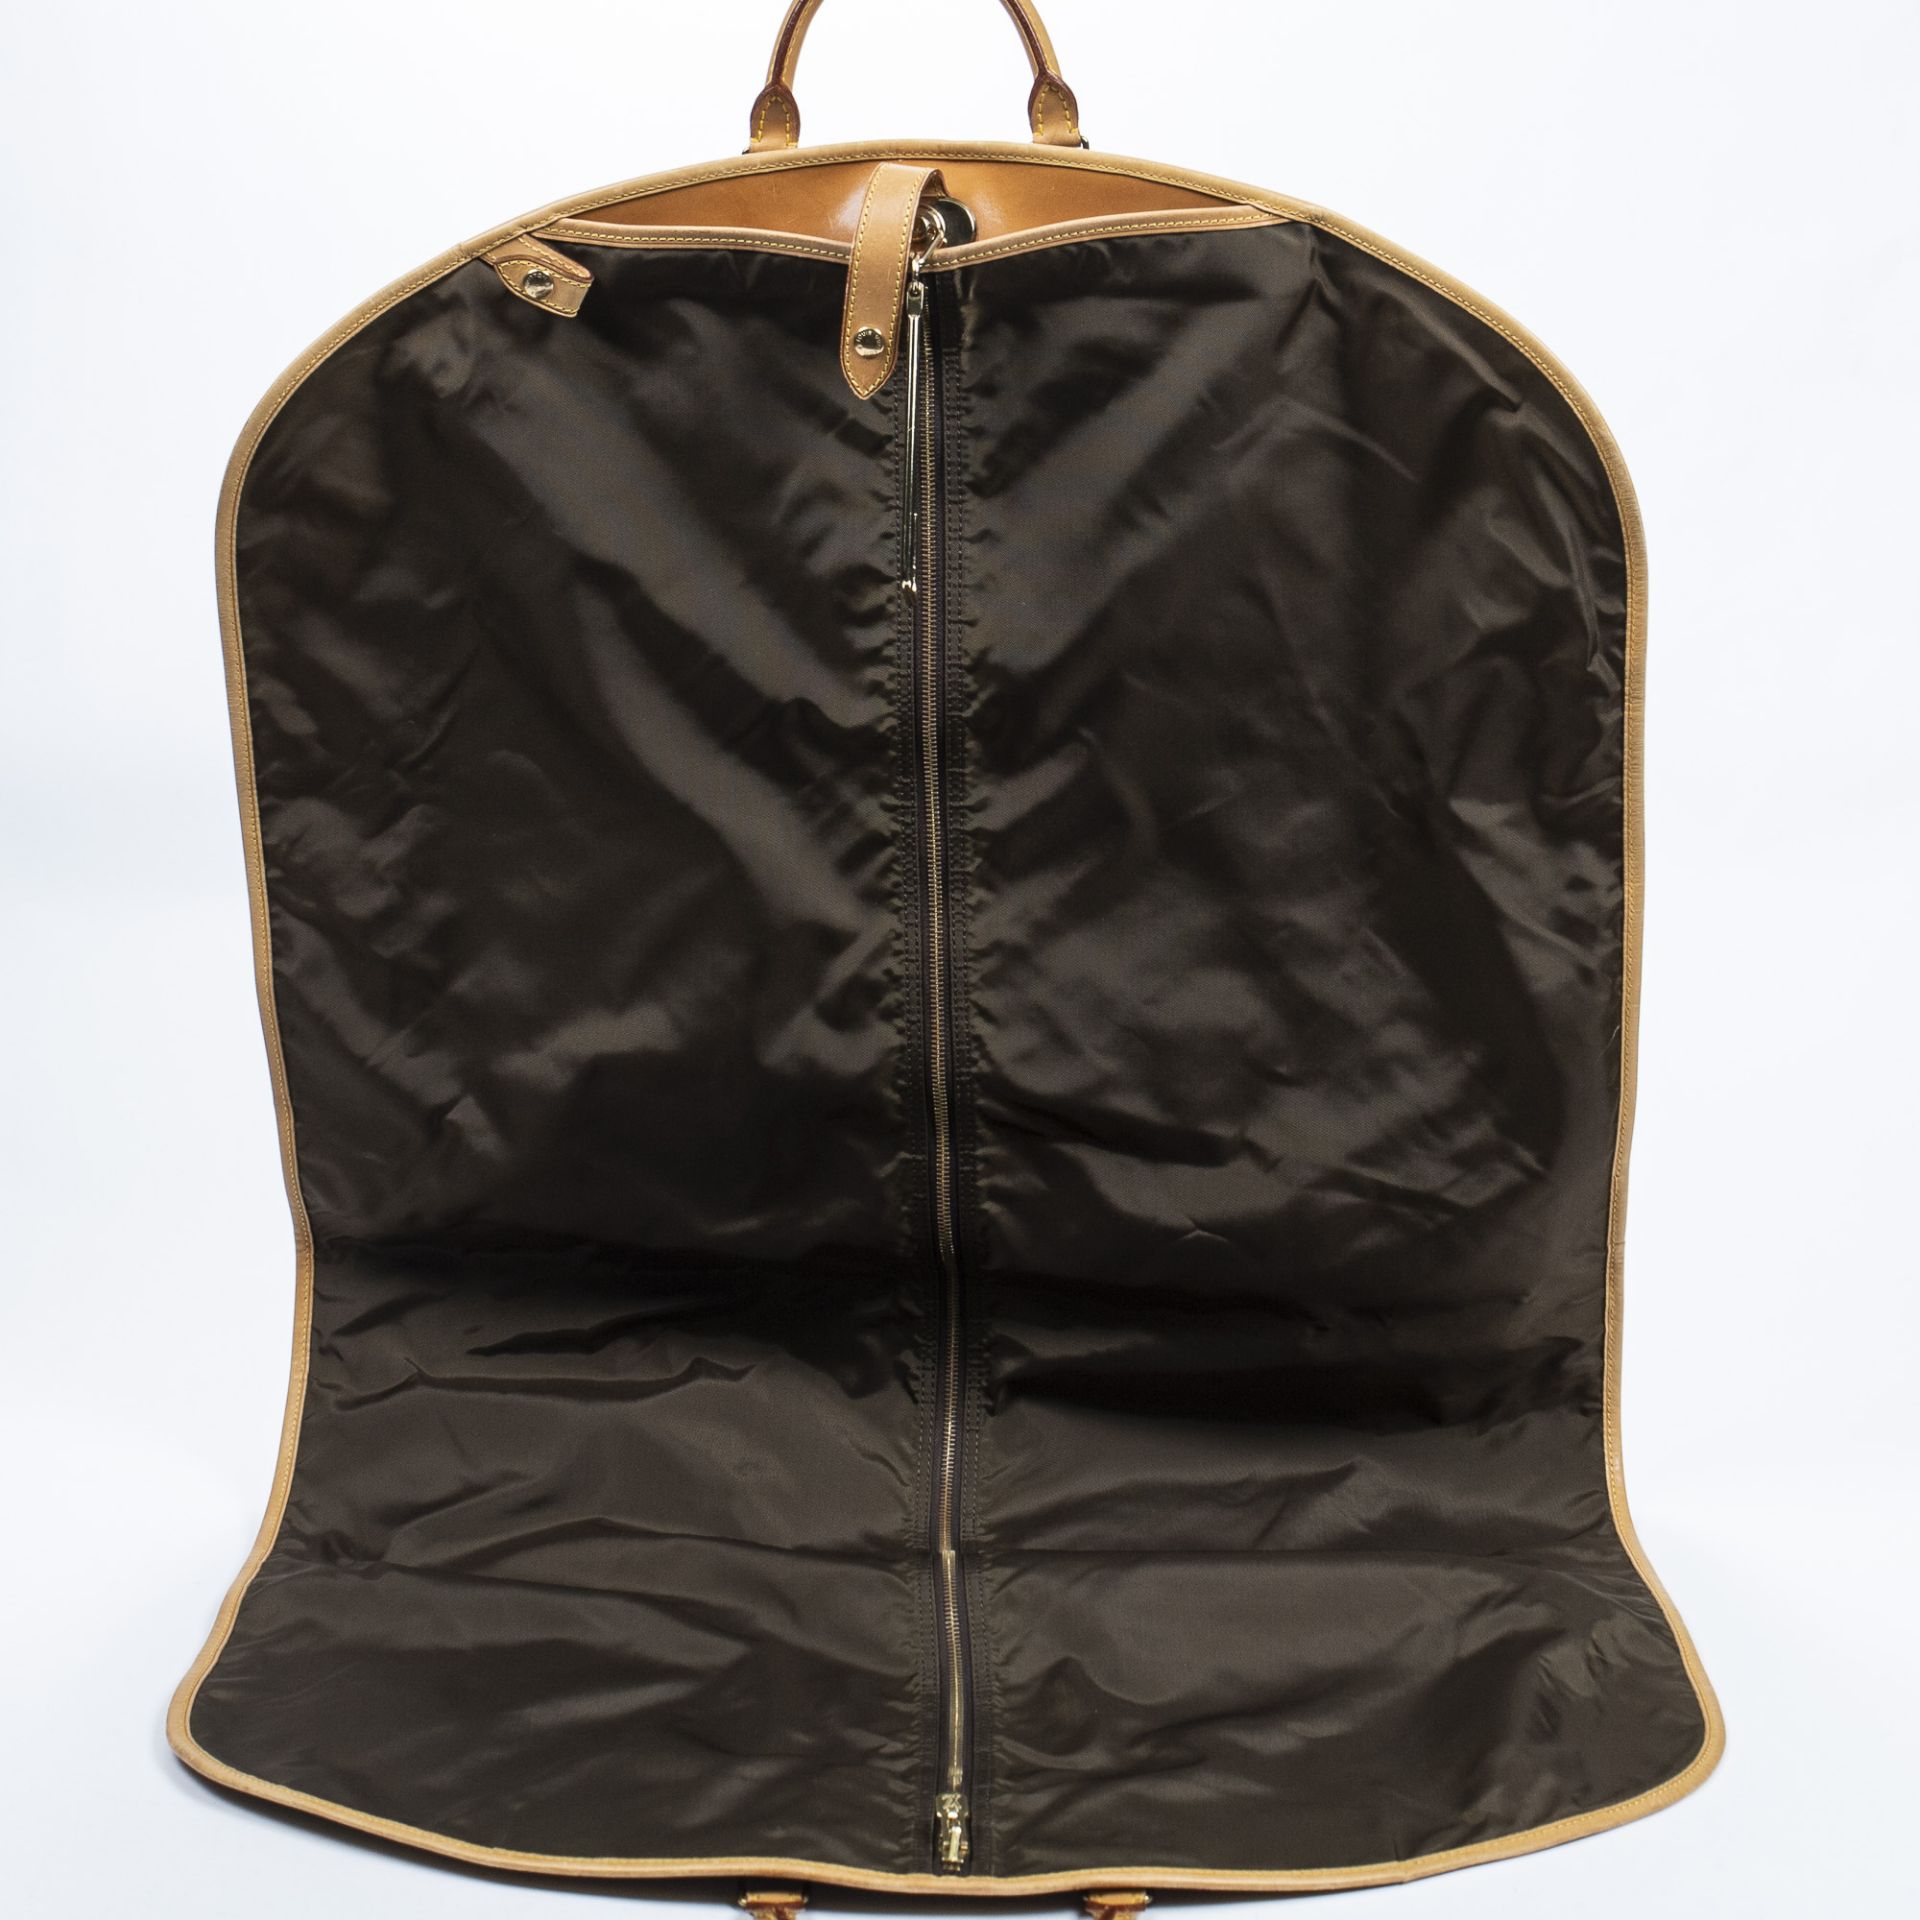 RRP £2,000.00 Lot To Contain 1 Louis Vuitton Coated Canvas Garment Bag Shoulder Bag In Brown - 96* - Image 3 of 3